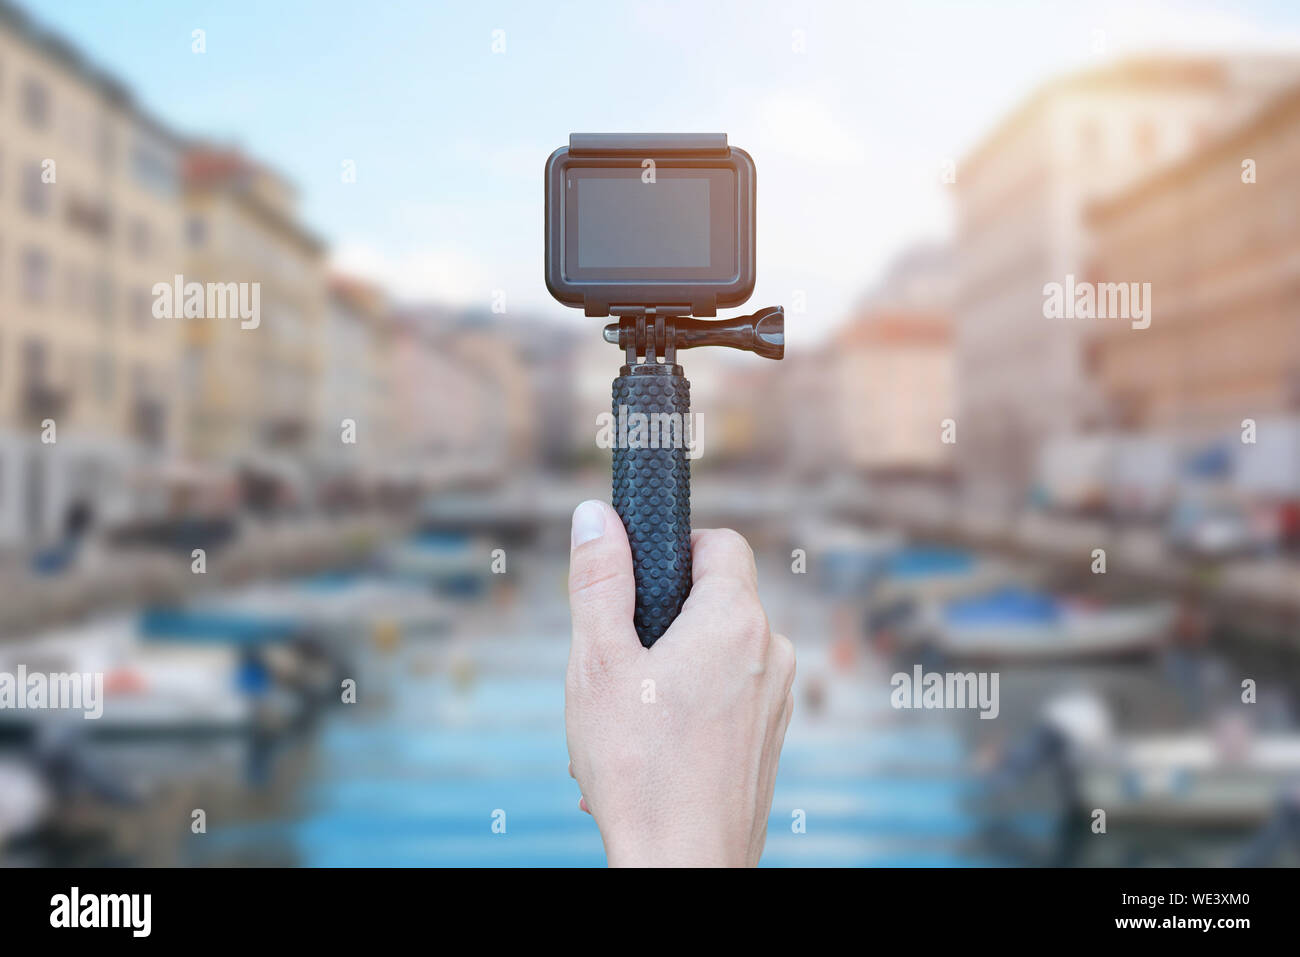 Action camera on stick in hand recording city concept. Blank screen for mockup. Stock Photo